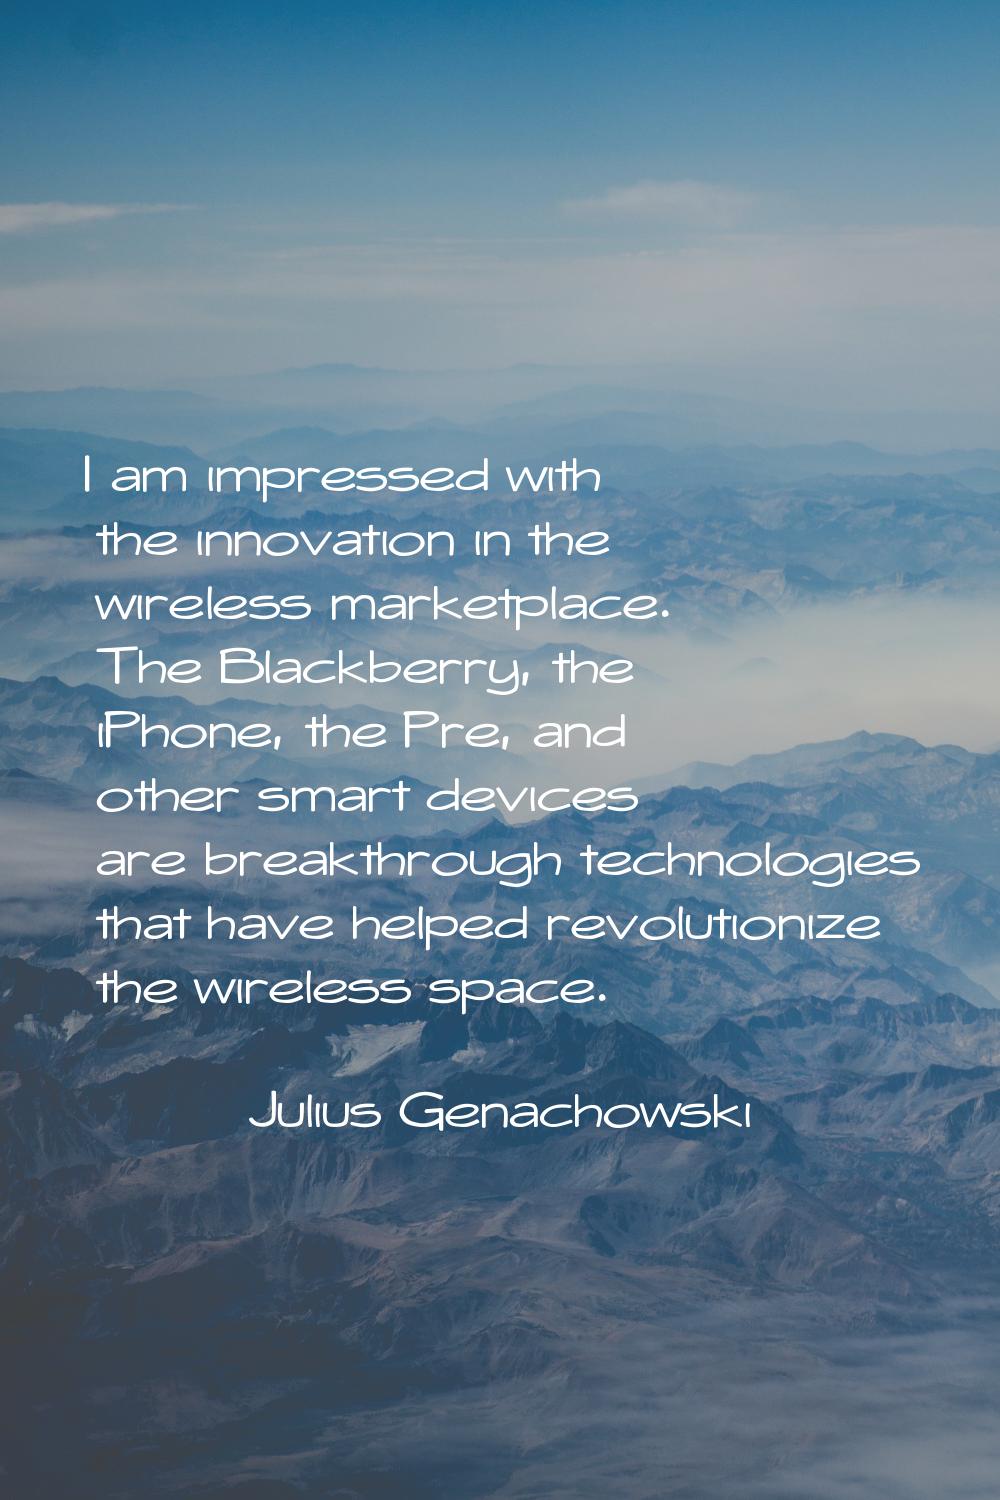 I am impressed with the innovation in the wireless marketplace. The Blackberry, the iPhone, the Pre